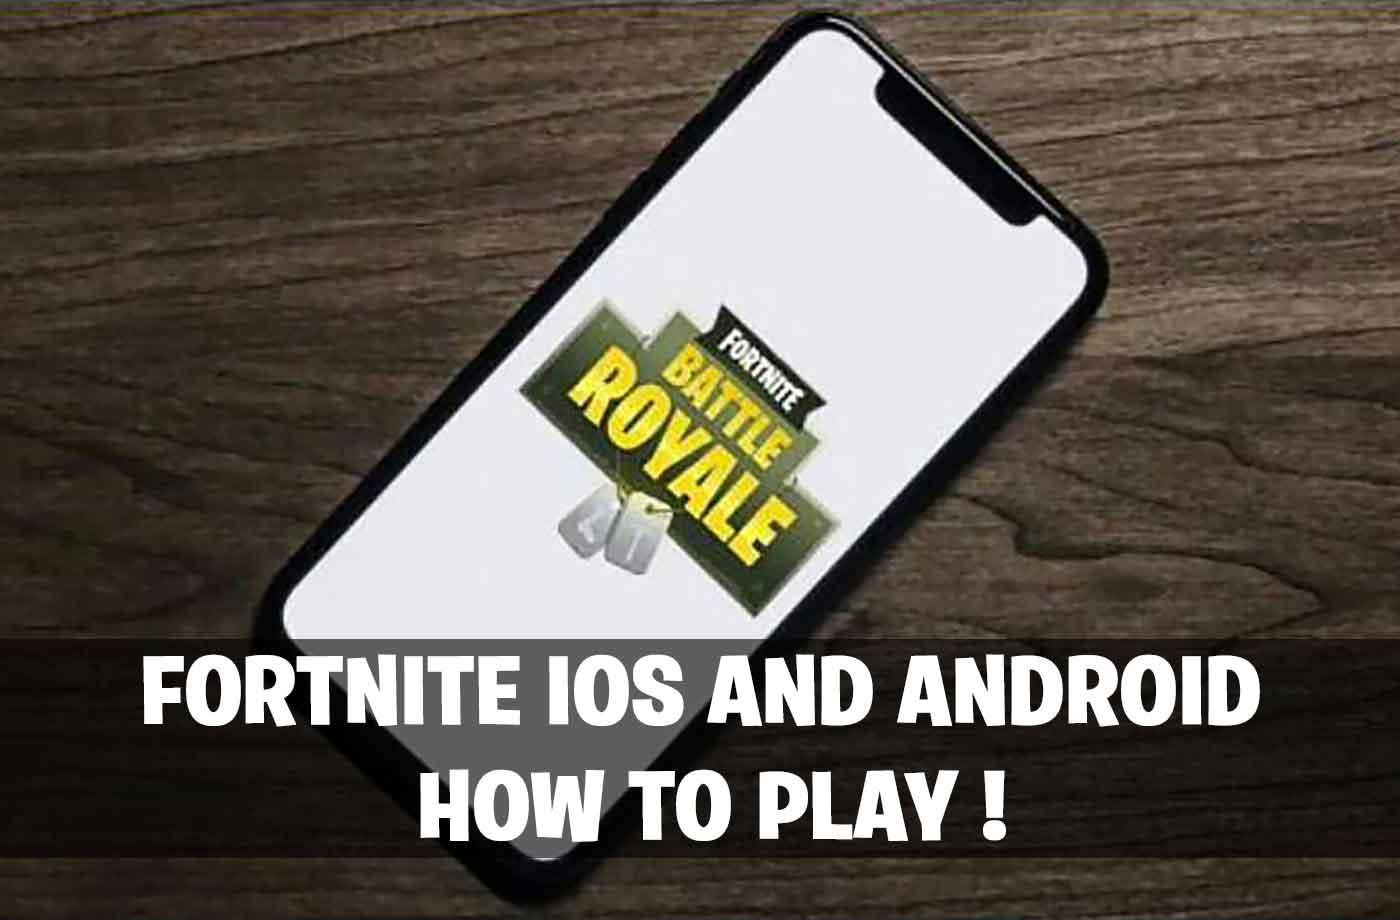 Fortnite Kill Logo - Fortnite Battle Royale how to play on iPhone iOS and Android (APK ...